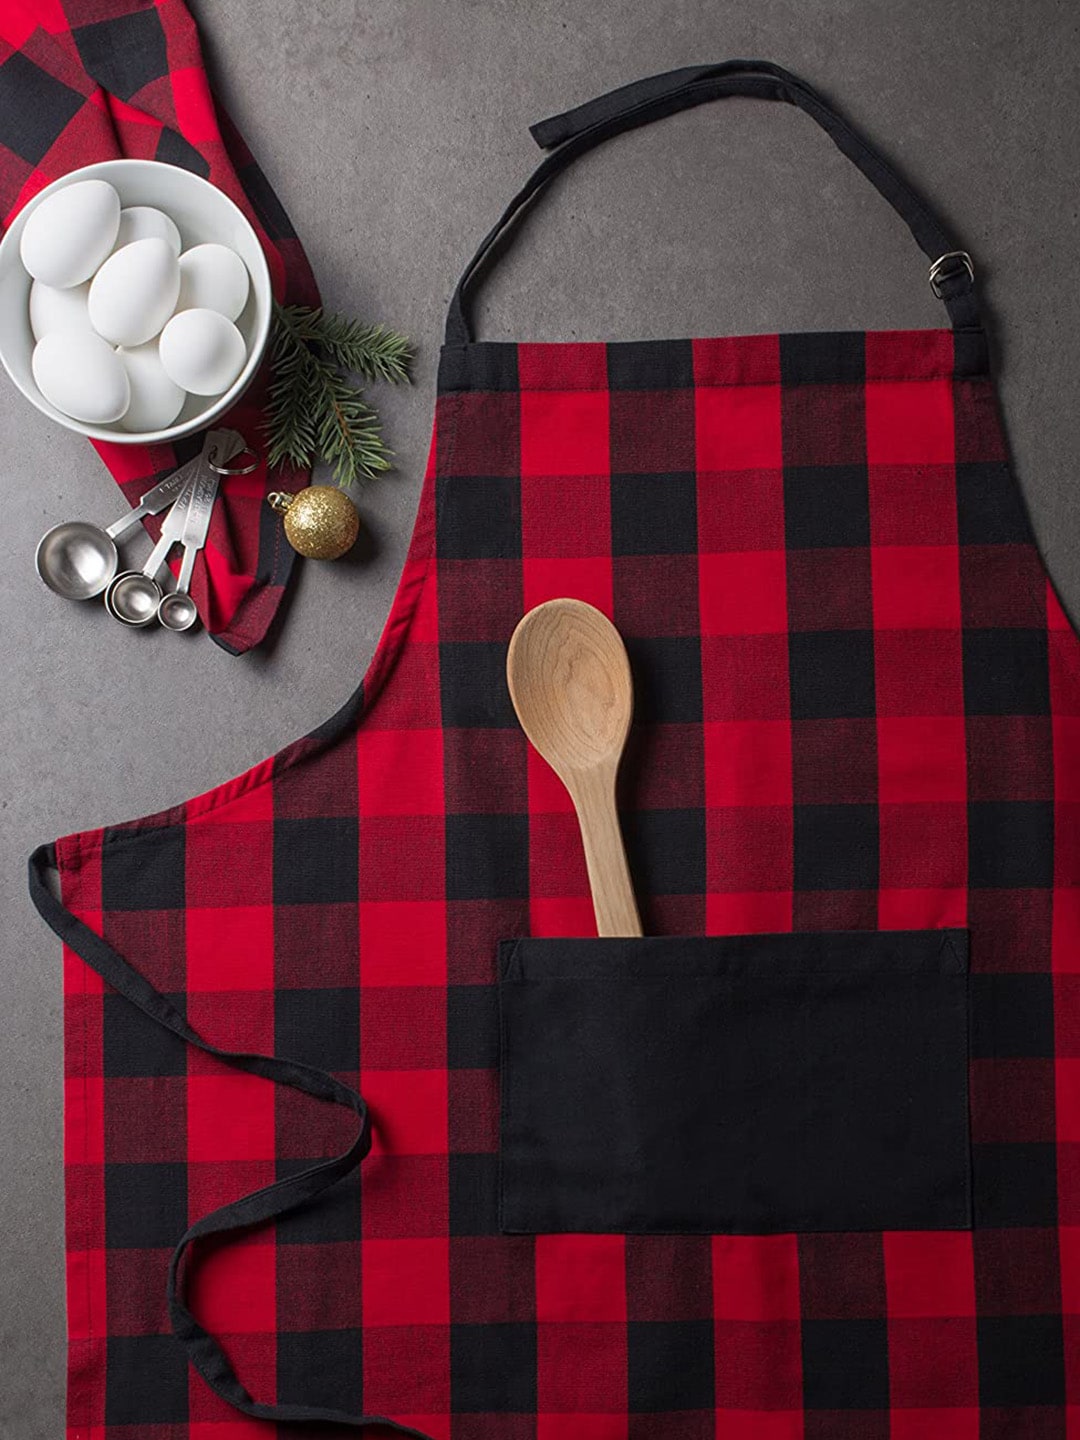 Lushomes Red & Black Checked Cotton Kitchen Apron Price in India